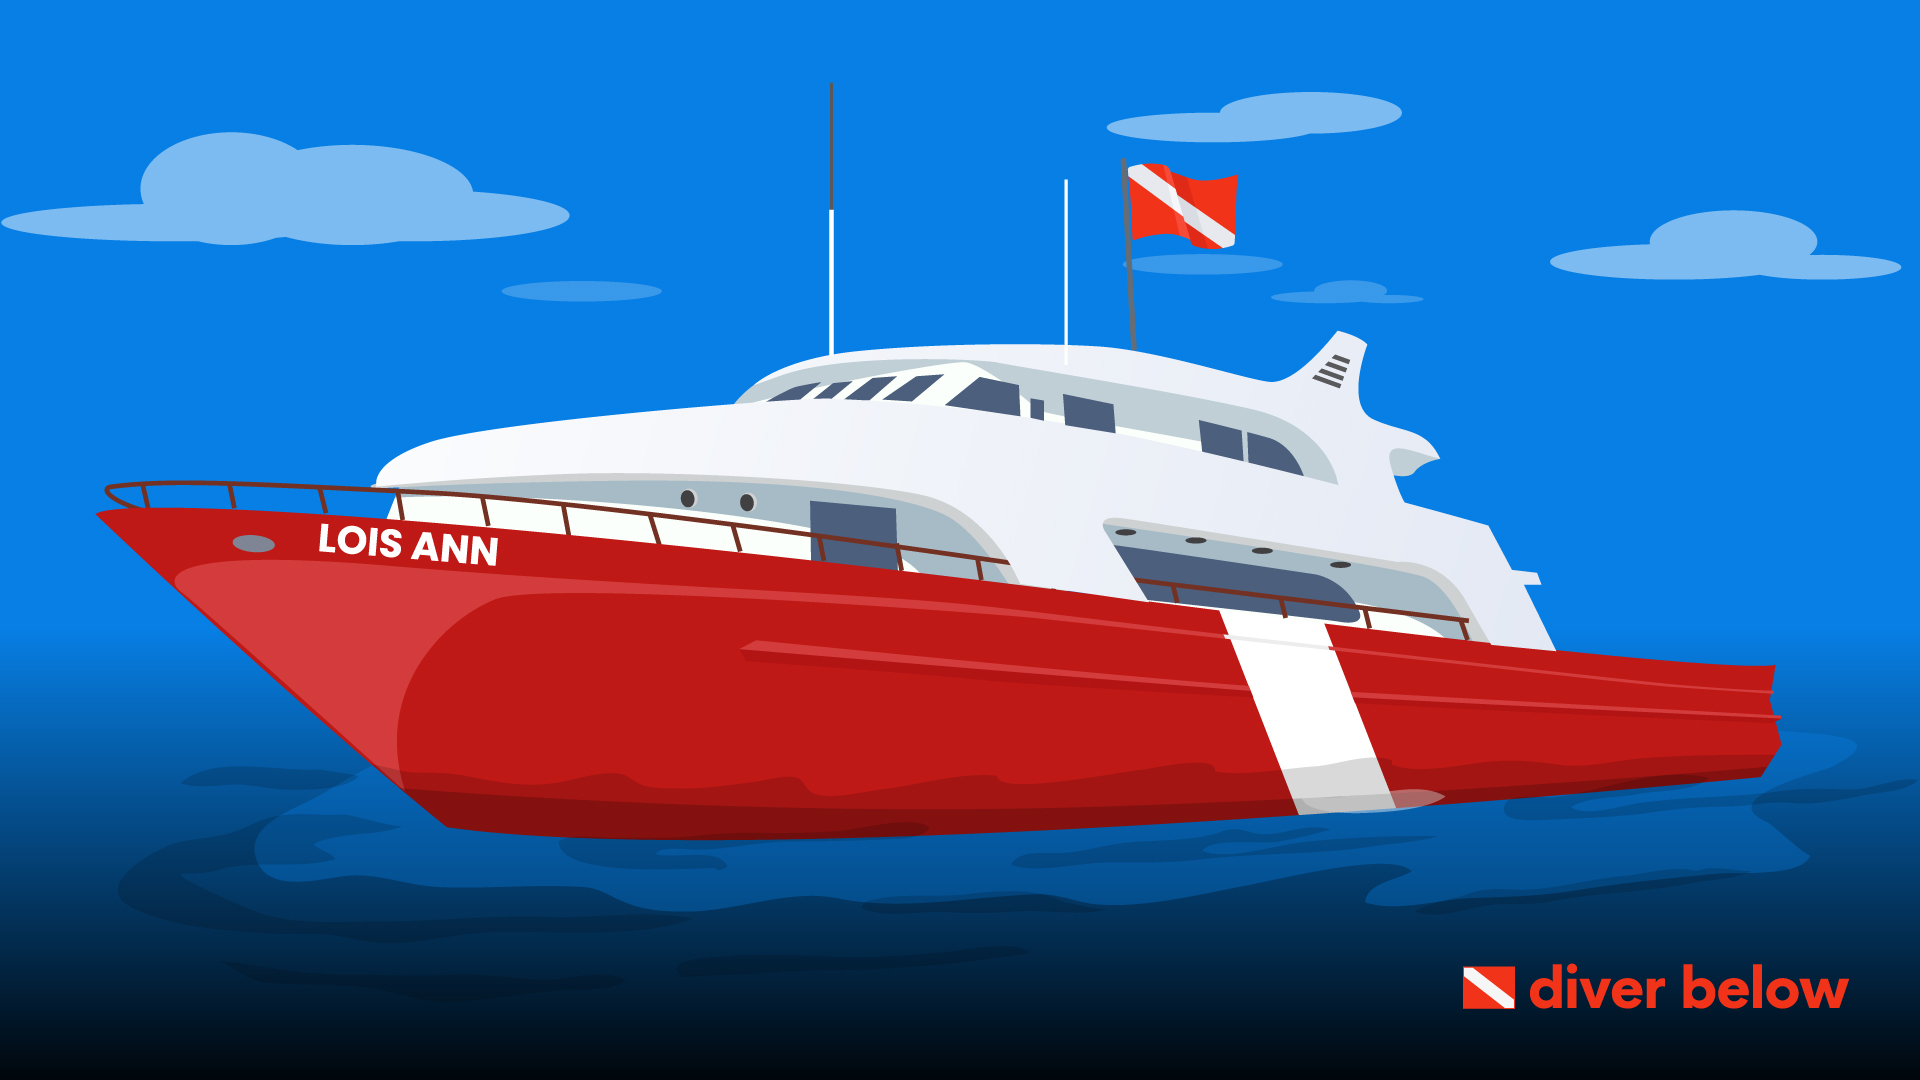 vector graphic showing a recreation of the Lois Ann dive boat